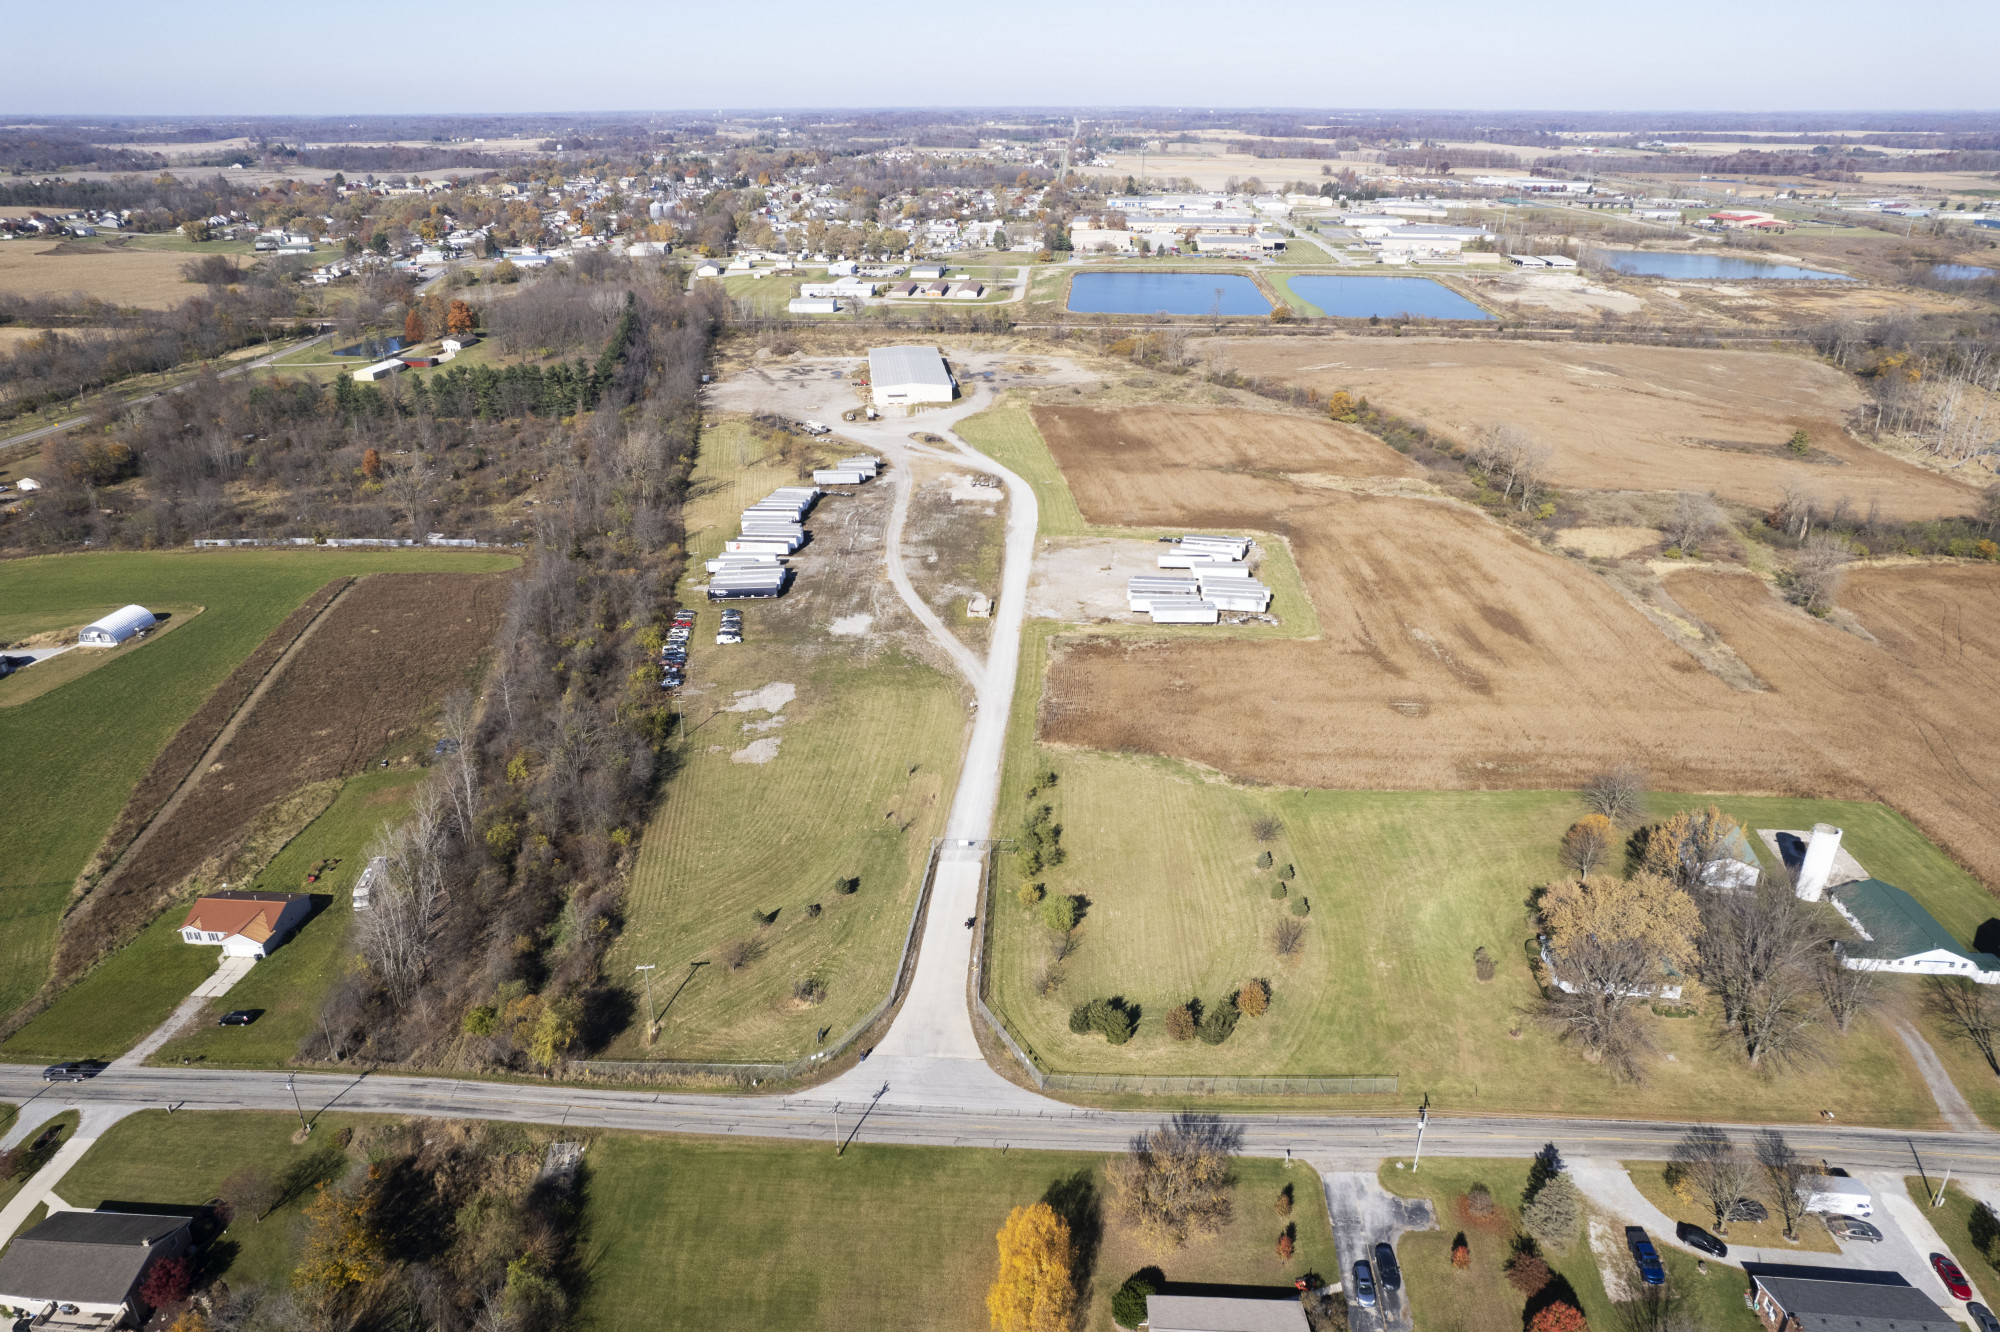 Sturges Property Group-9999 E Baseline Rd, Avilla, IN Industrial 